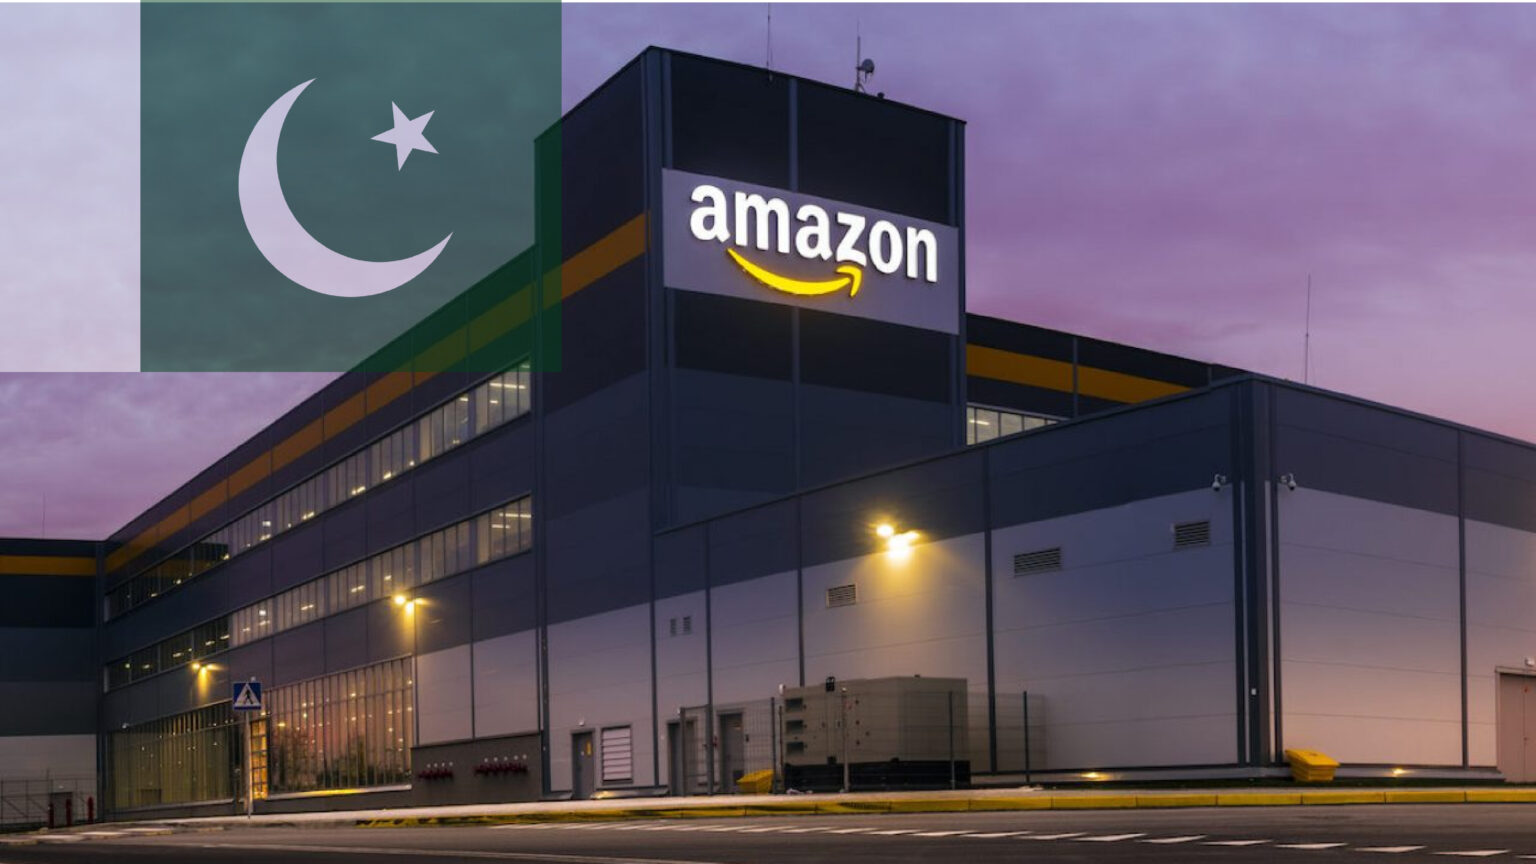 Pakistan is the new addition to Amazon’s list of approved sellers